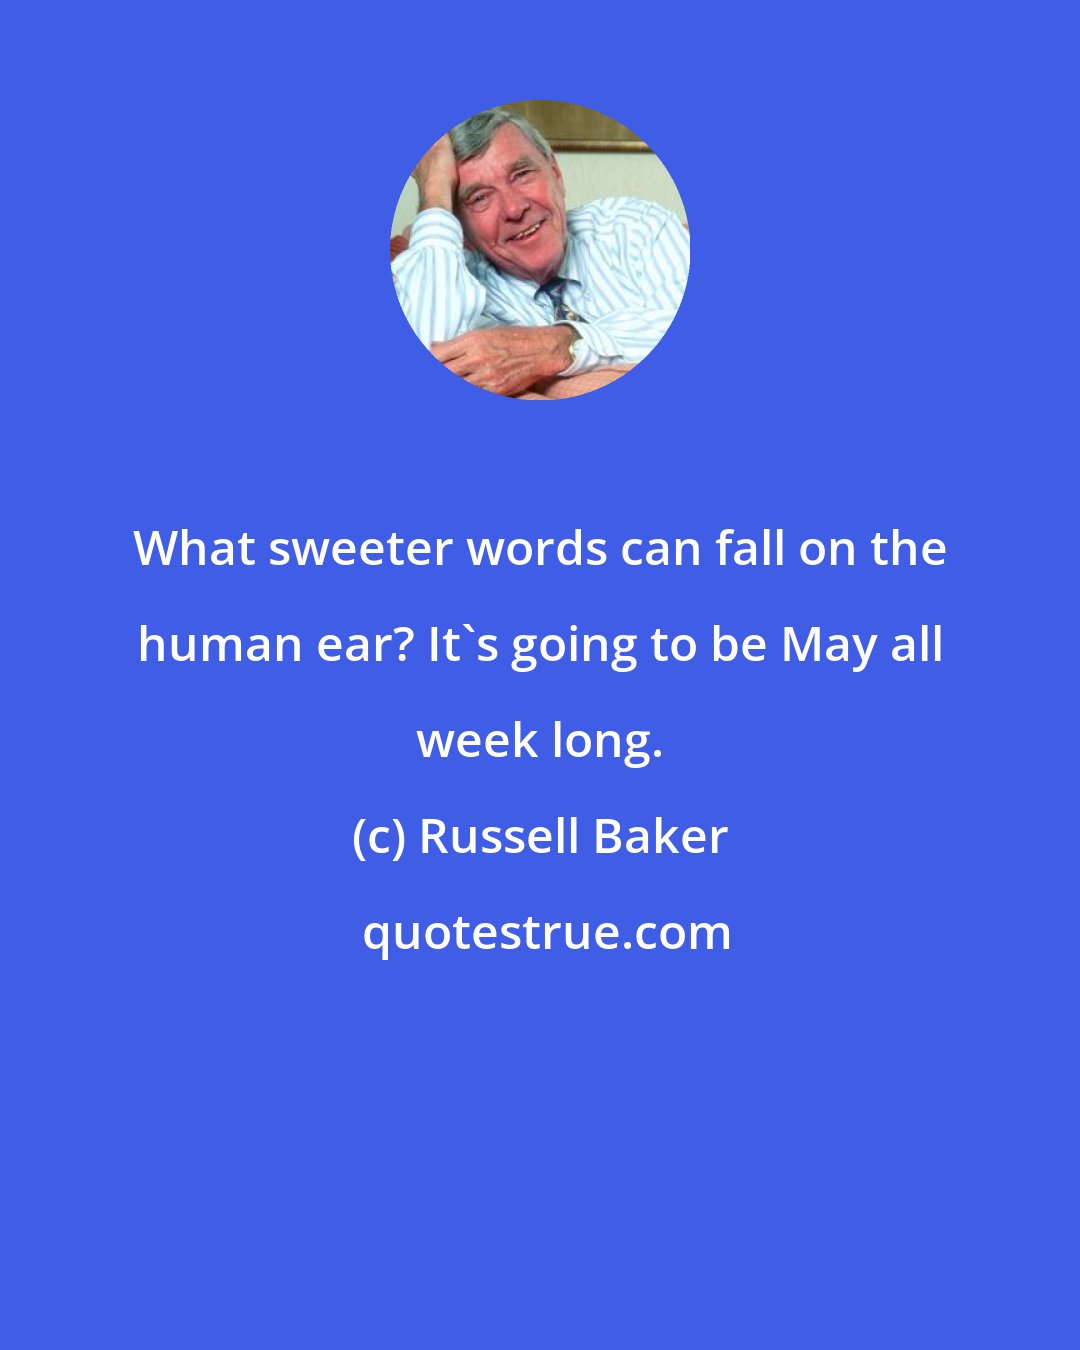 Russell Baker: What sweeter words can fall on the human ear? It's going to be May all week long.